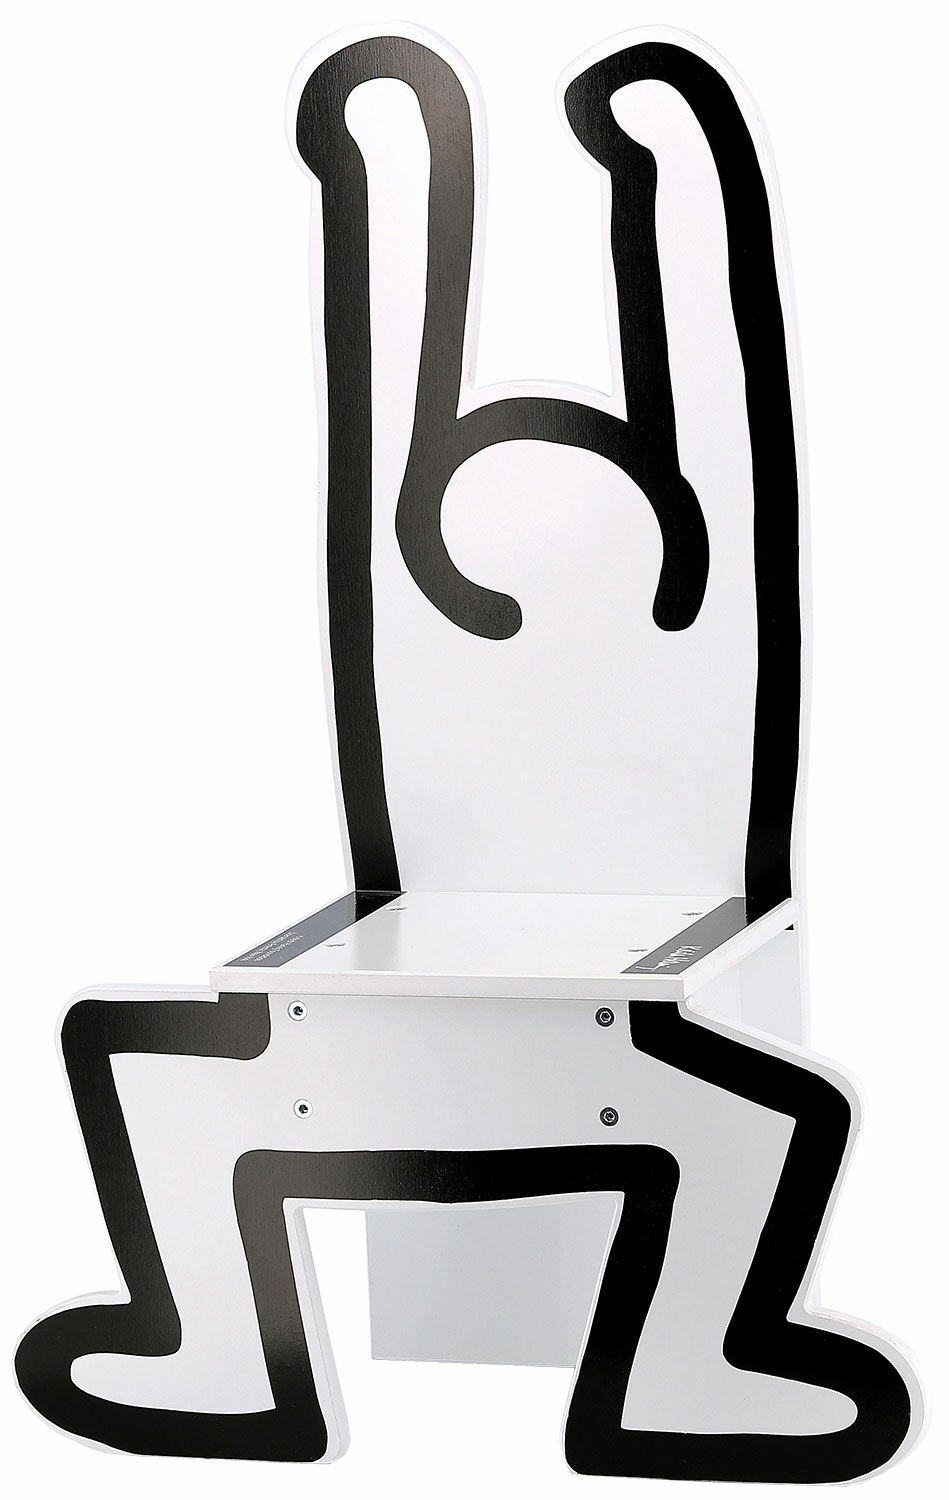 Chaise pour enfants "Keith Haring", version blanche